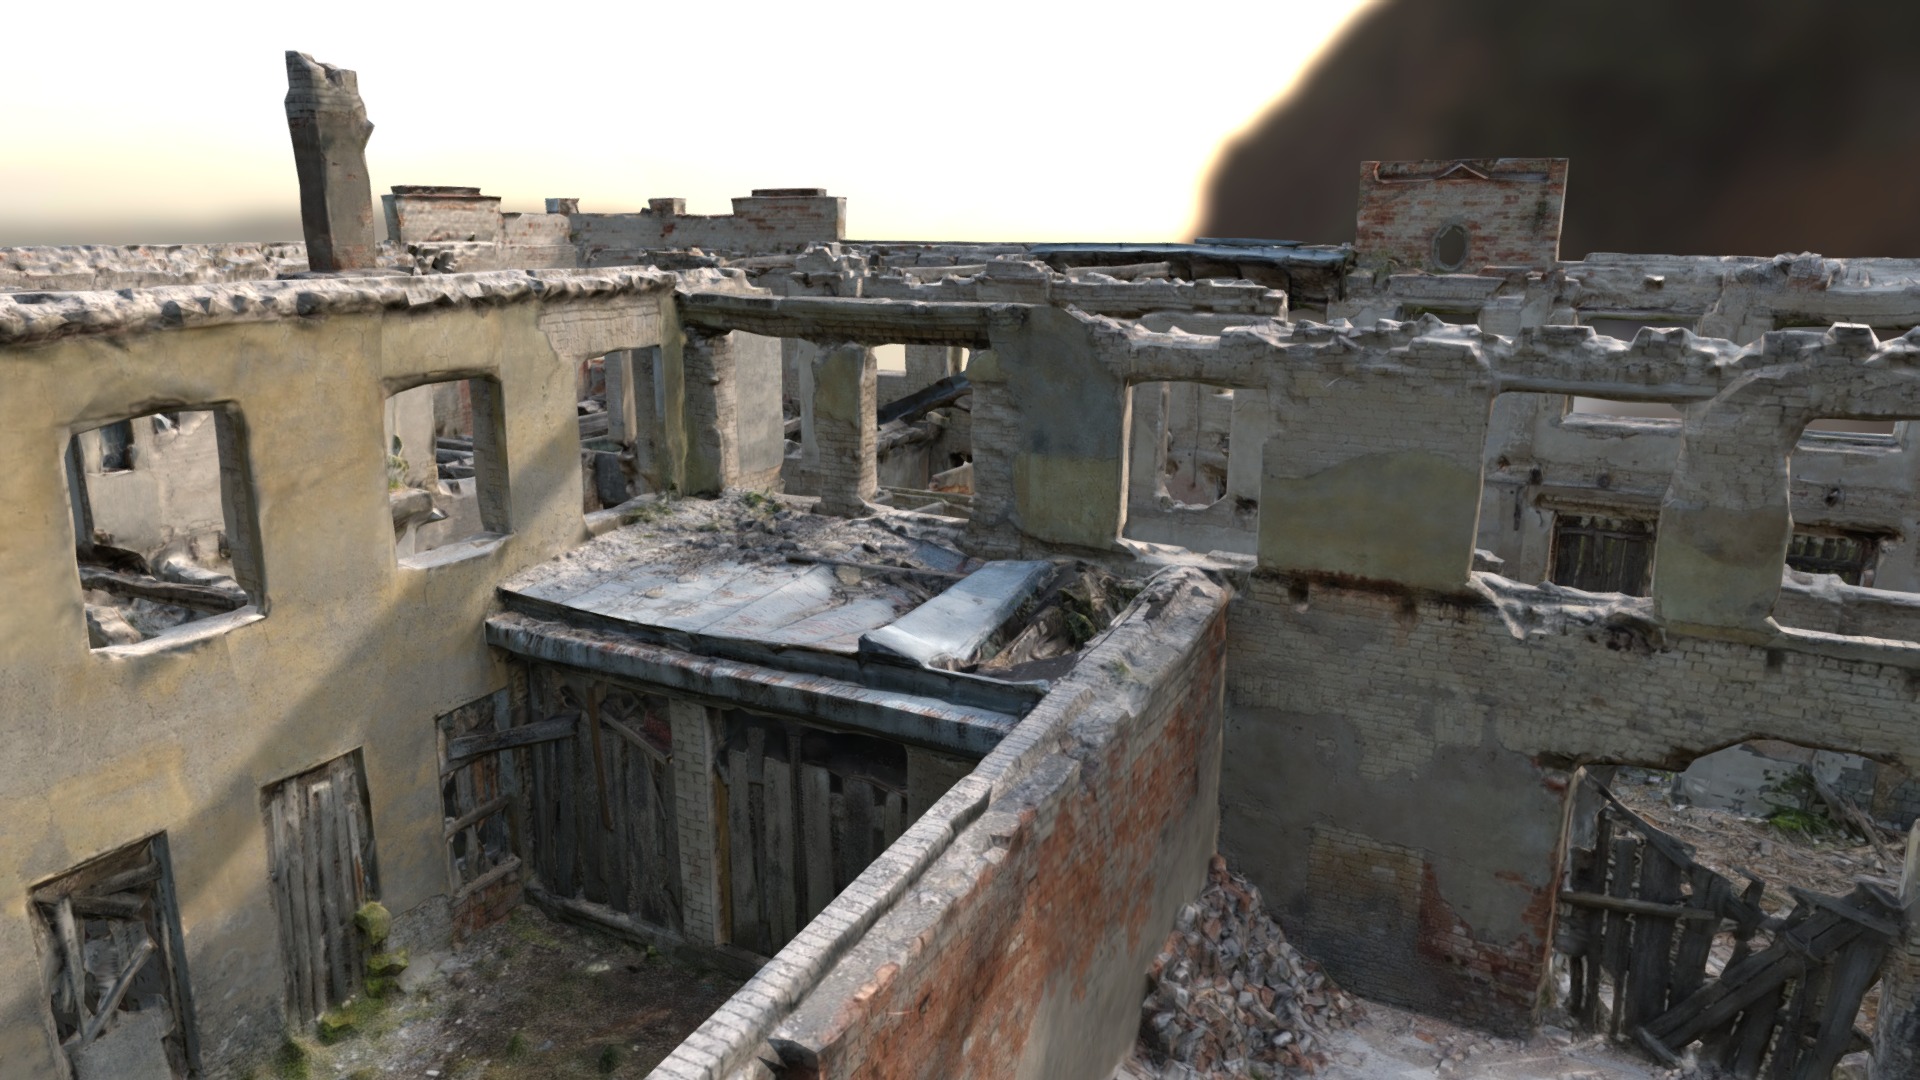 3D model Destroyed Industrial Structure - This is a 3D model of the Destroyed Industrial Structure. The 3D model is about a building that has been destroyed.